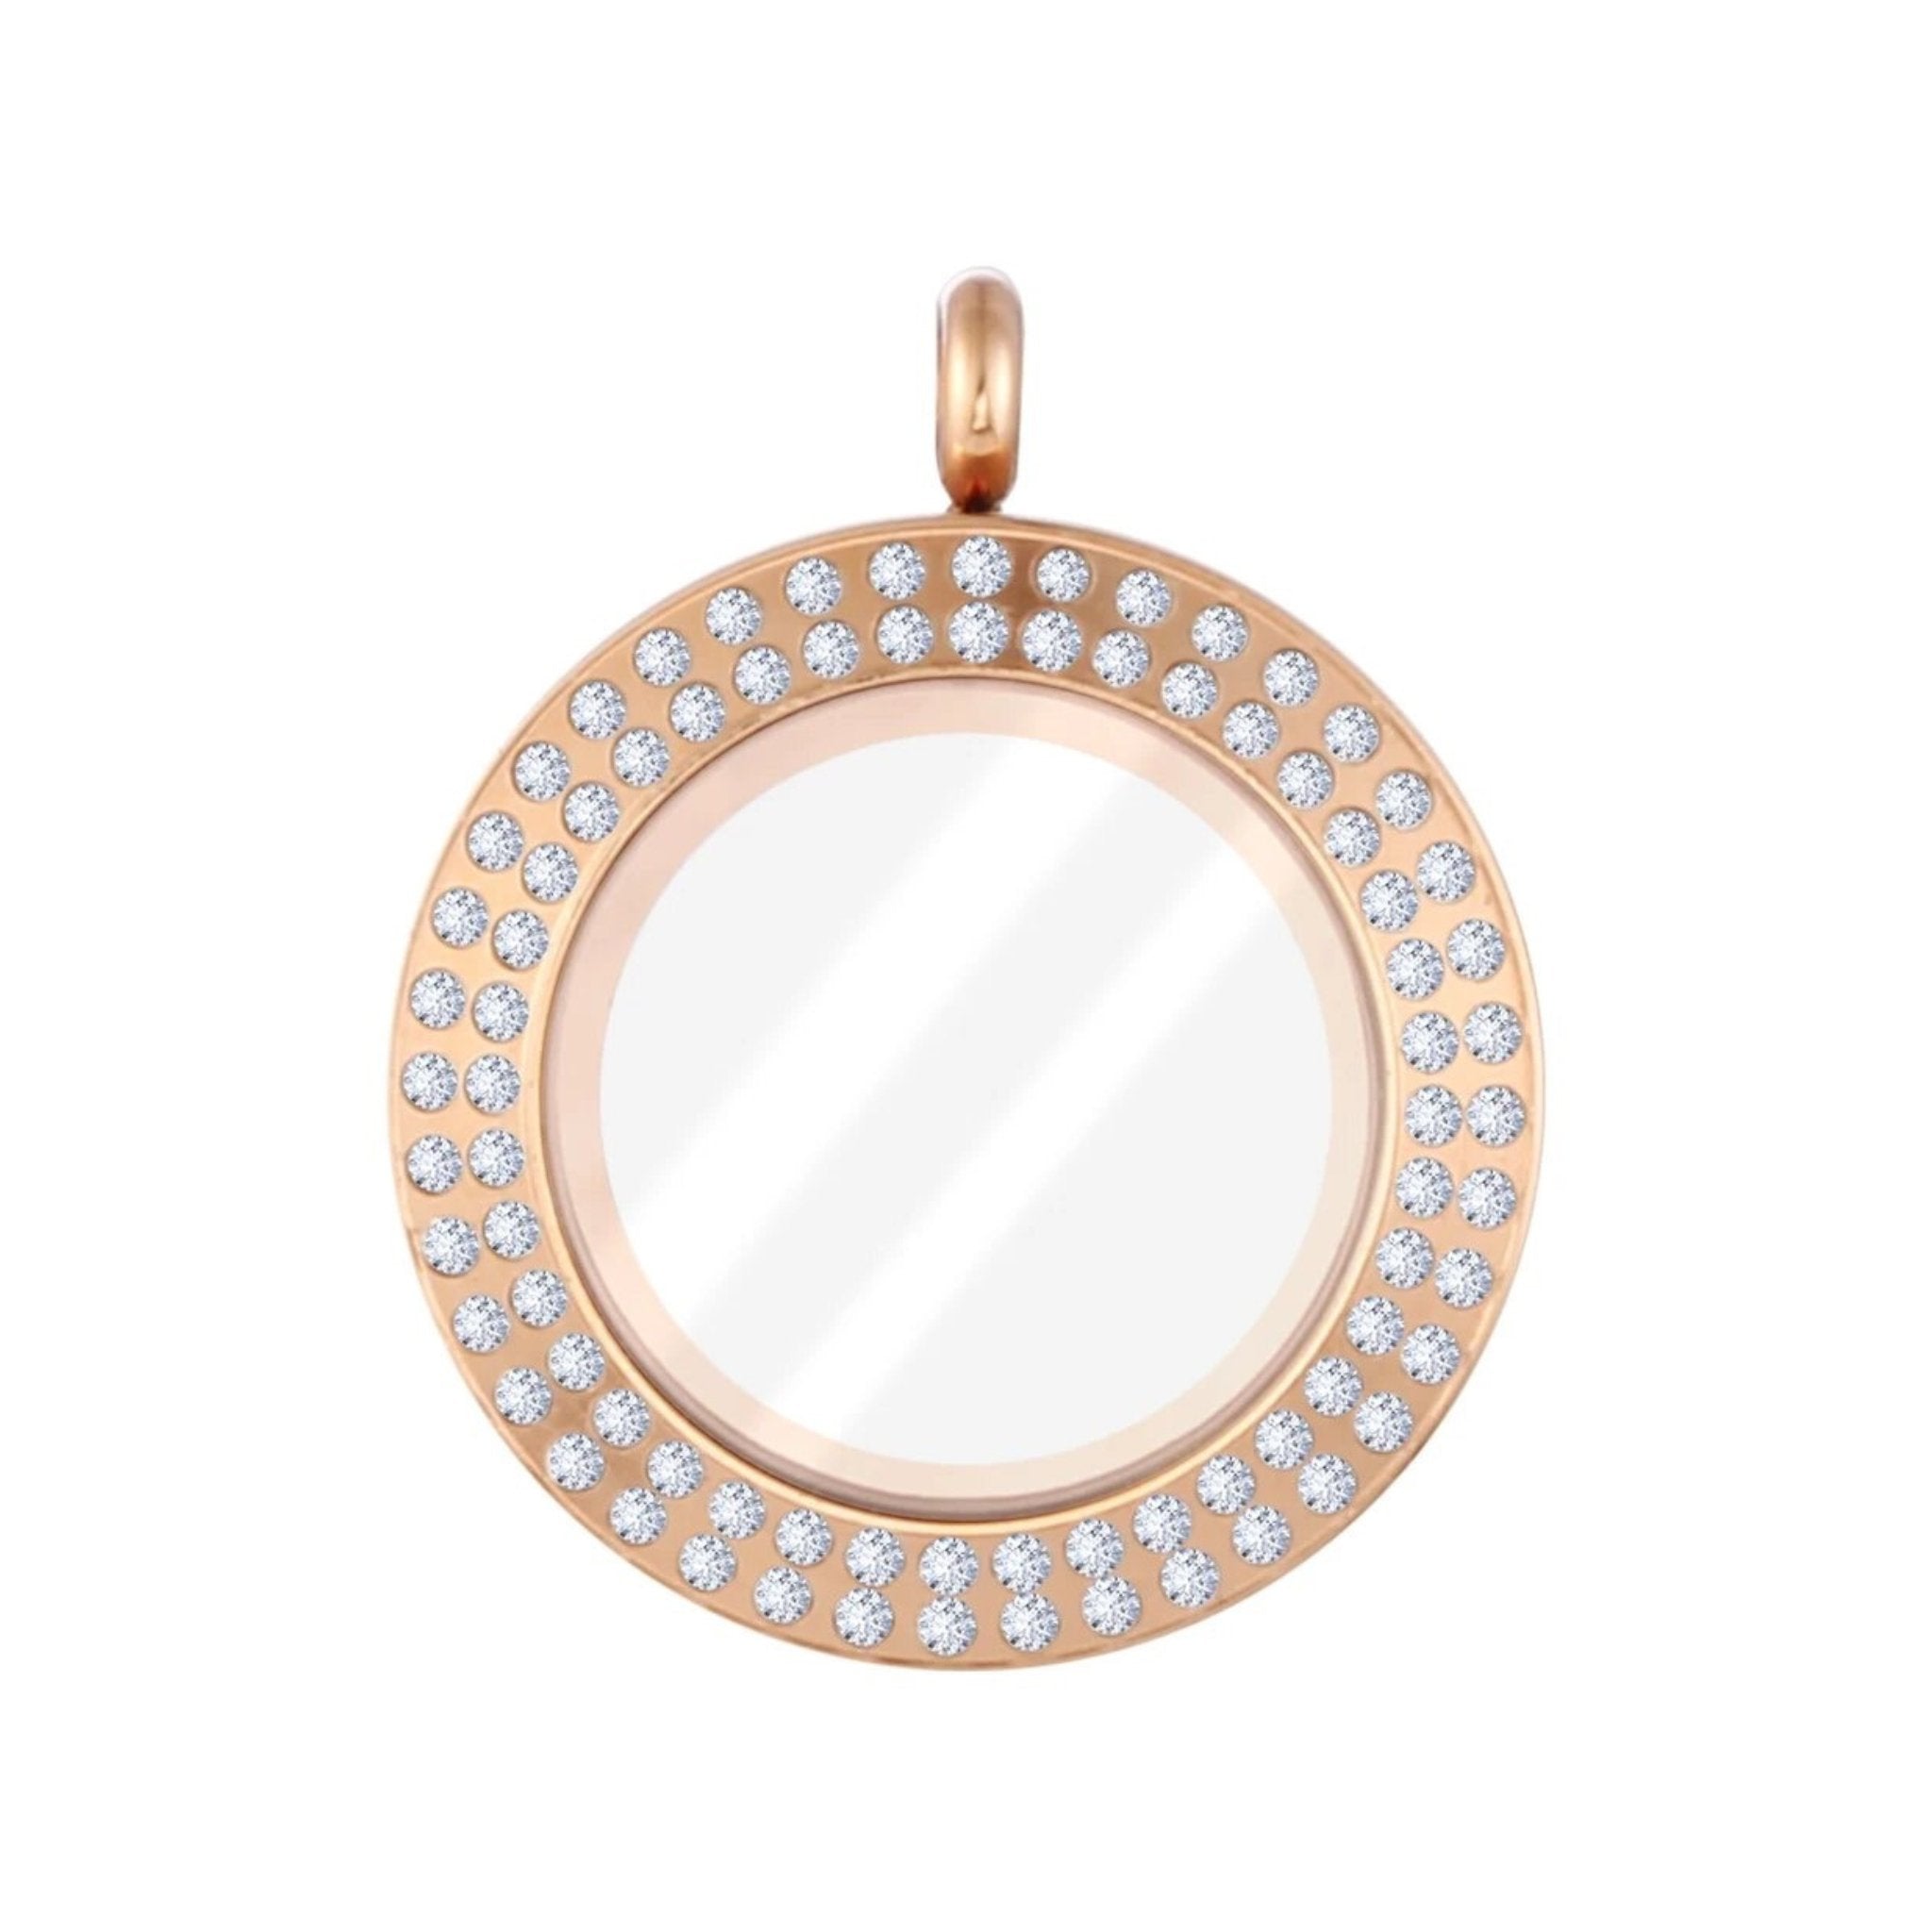 NEW! Limited Edition Memory Locket - Double Rose Gold Crystal